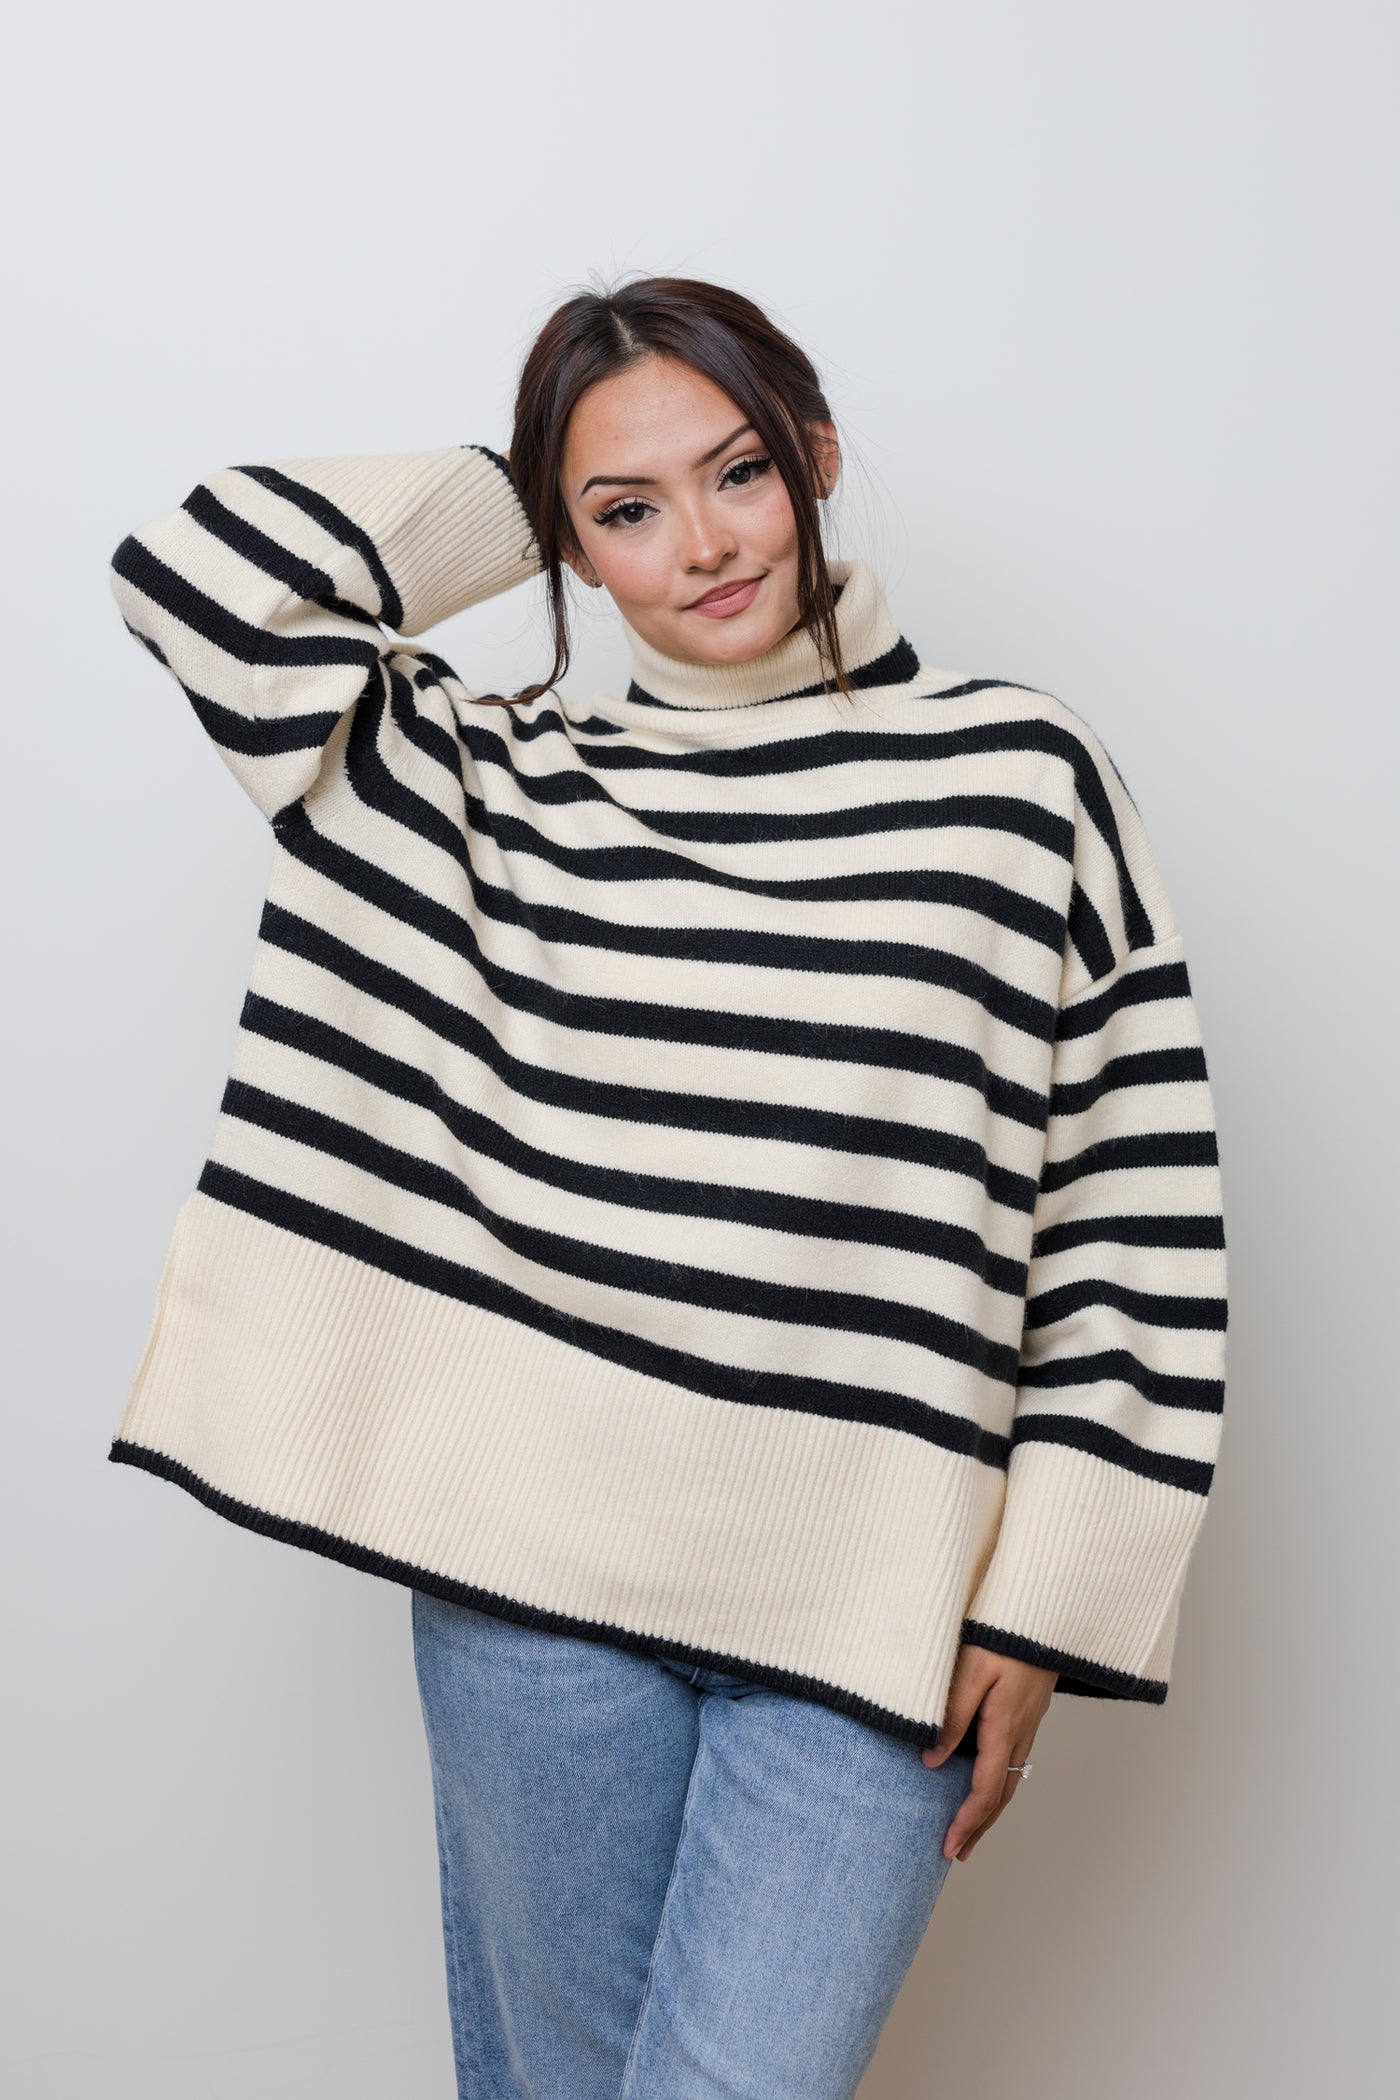 The Modern Chic Striped Turtleneck Sweater